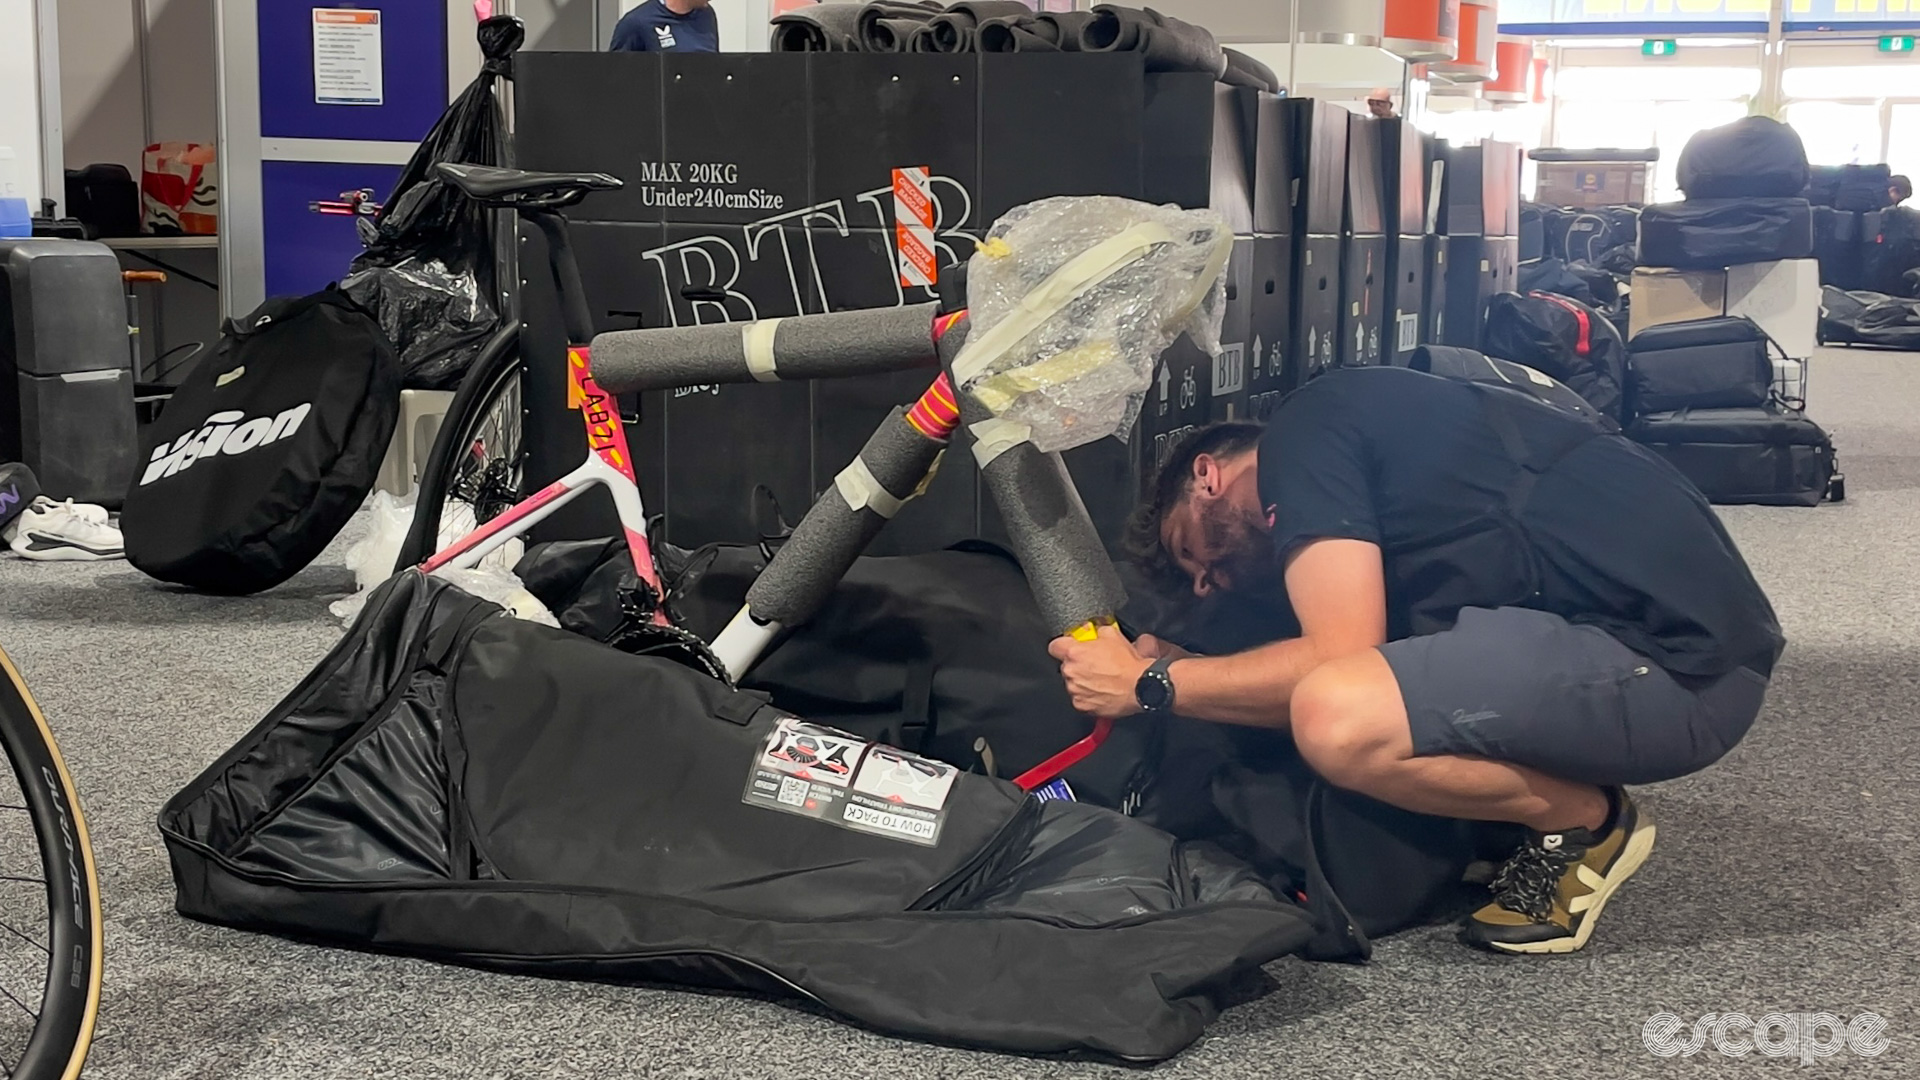 The photo shows a team mechanic wrapping a bike in soft foam and packing it into a bike bag. 